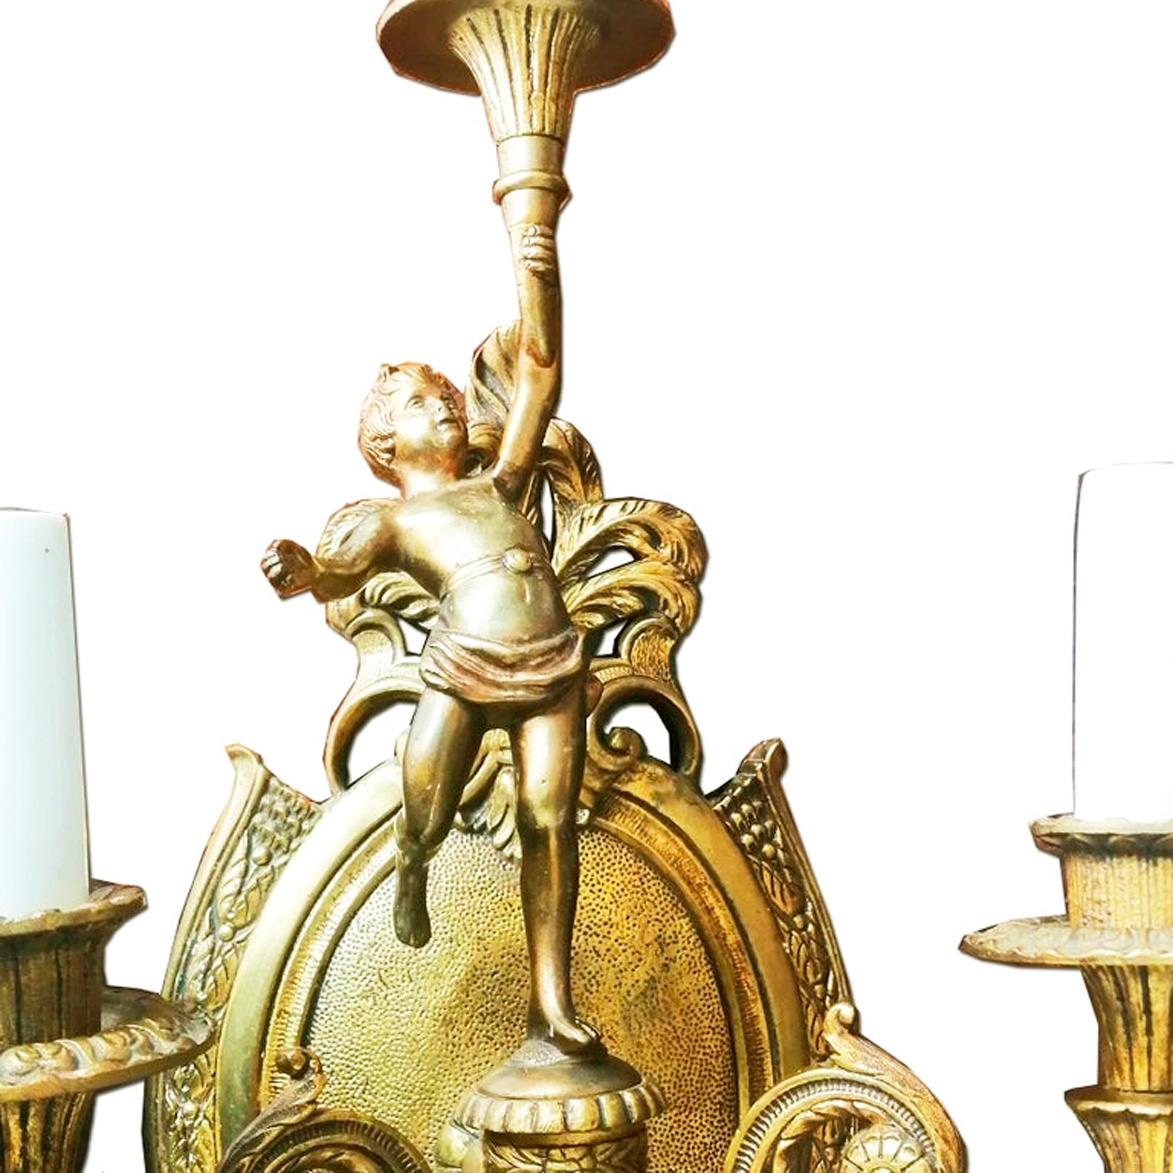  Wall Sconces French Empire Style Whit Cherub Putti Carrying Torch, Bronze, Pair In Excellent Condition For Sale In Mombuey, Zamora